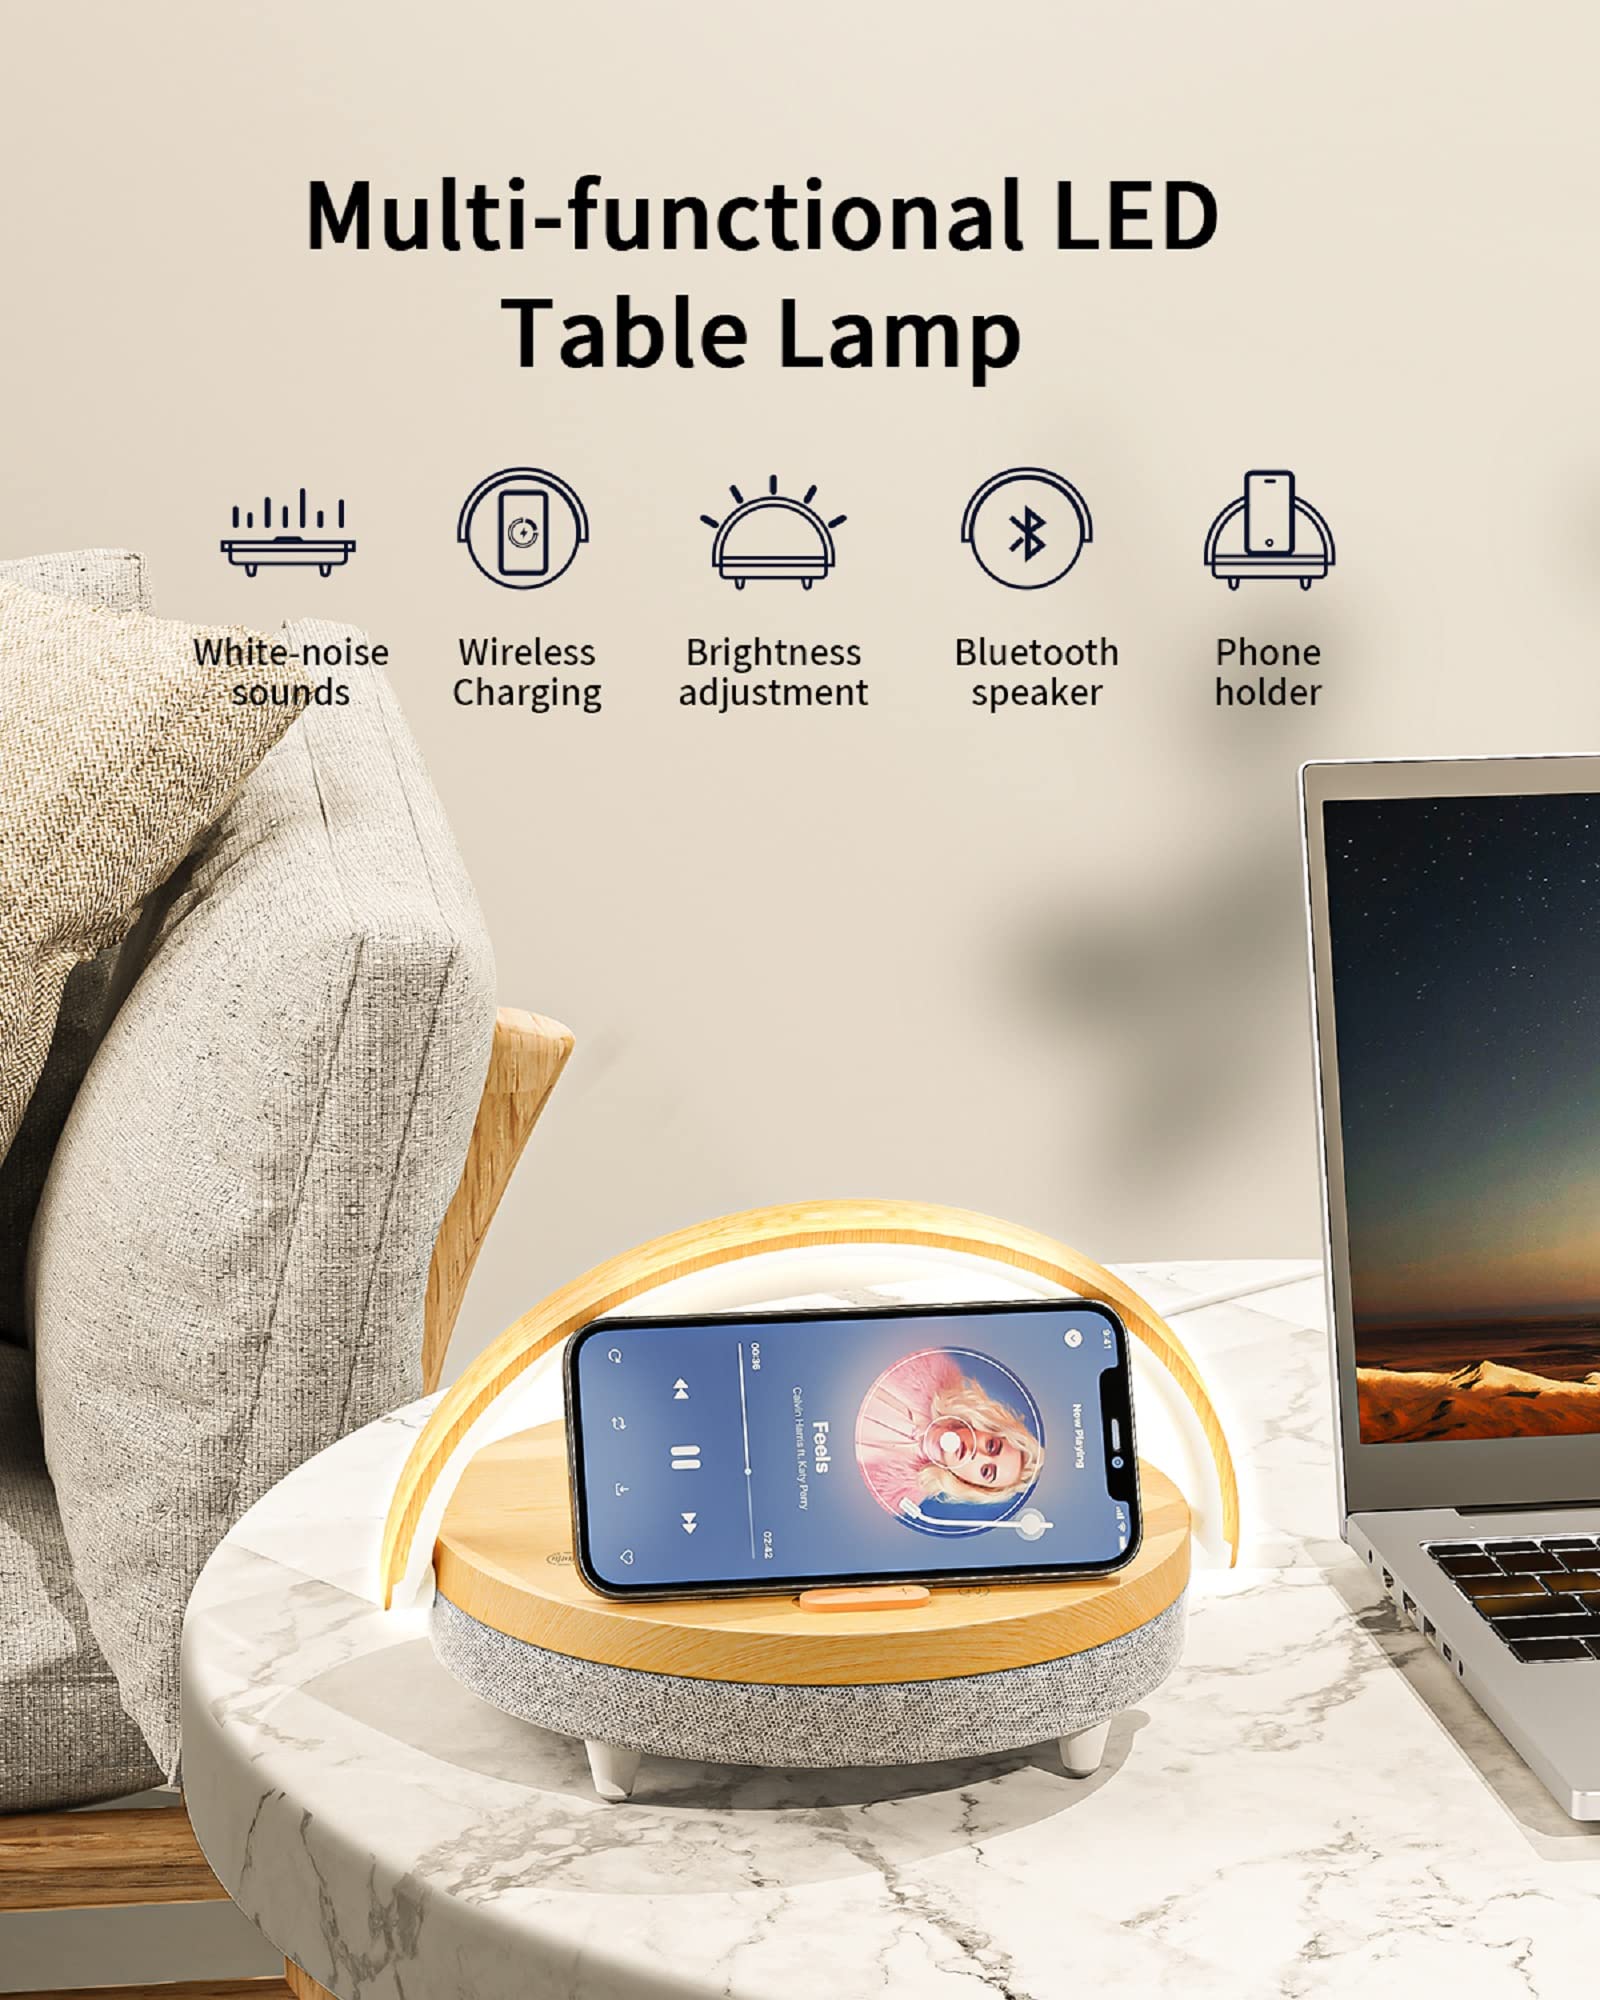 Vivilumens Bedside Table LED Night Light with Wireless Charger and Bluetooth Speaker, Desk Lamp As Sleep Aid White Noise Machine and Phone Holder, Great Birthday Gifts for Girlfriend, Women, Mom, Men